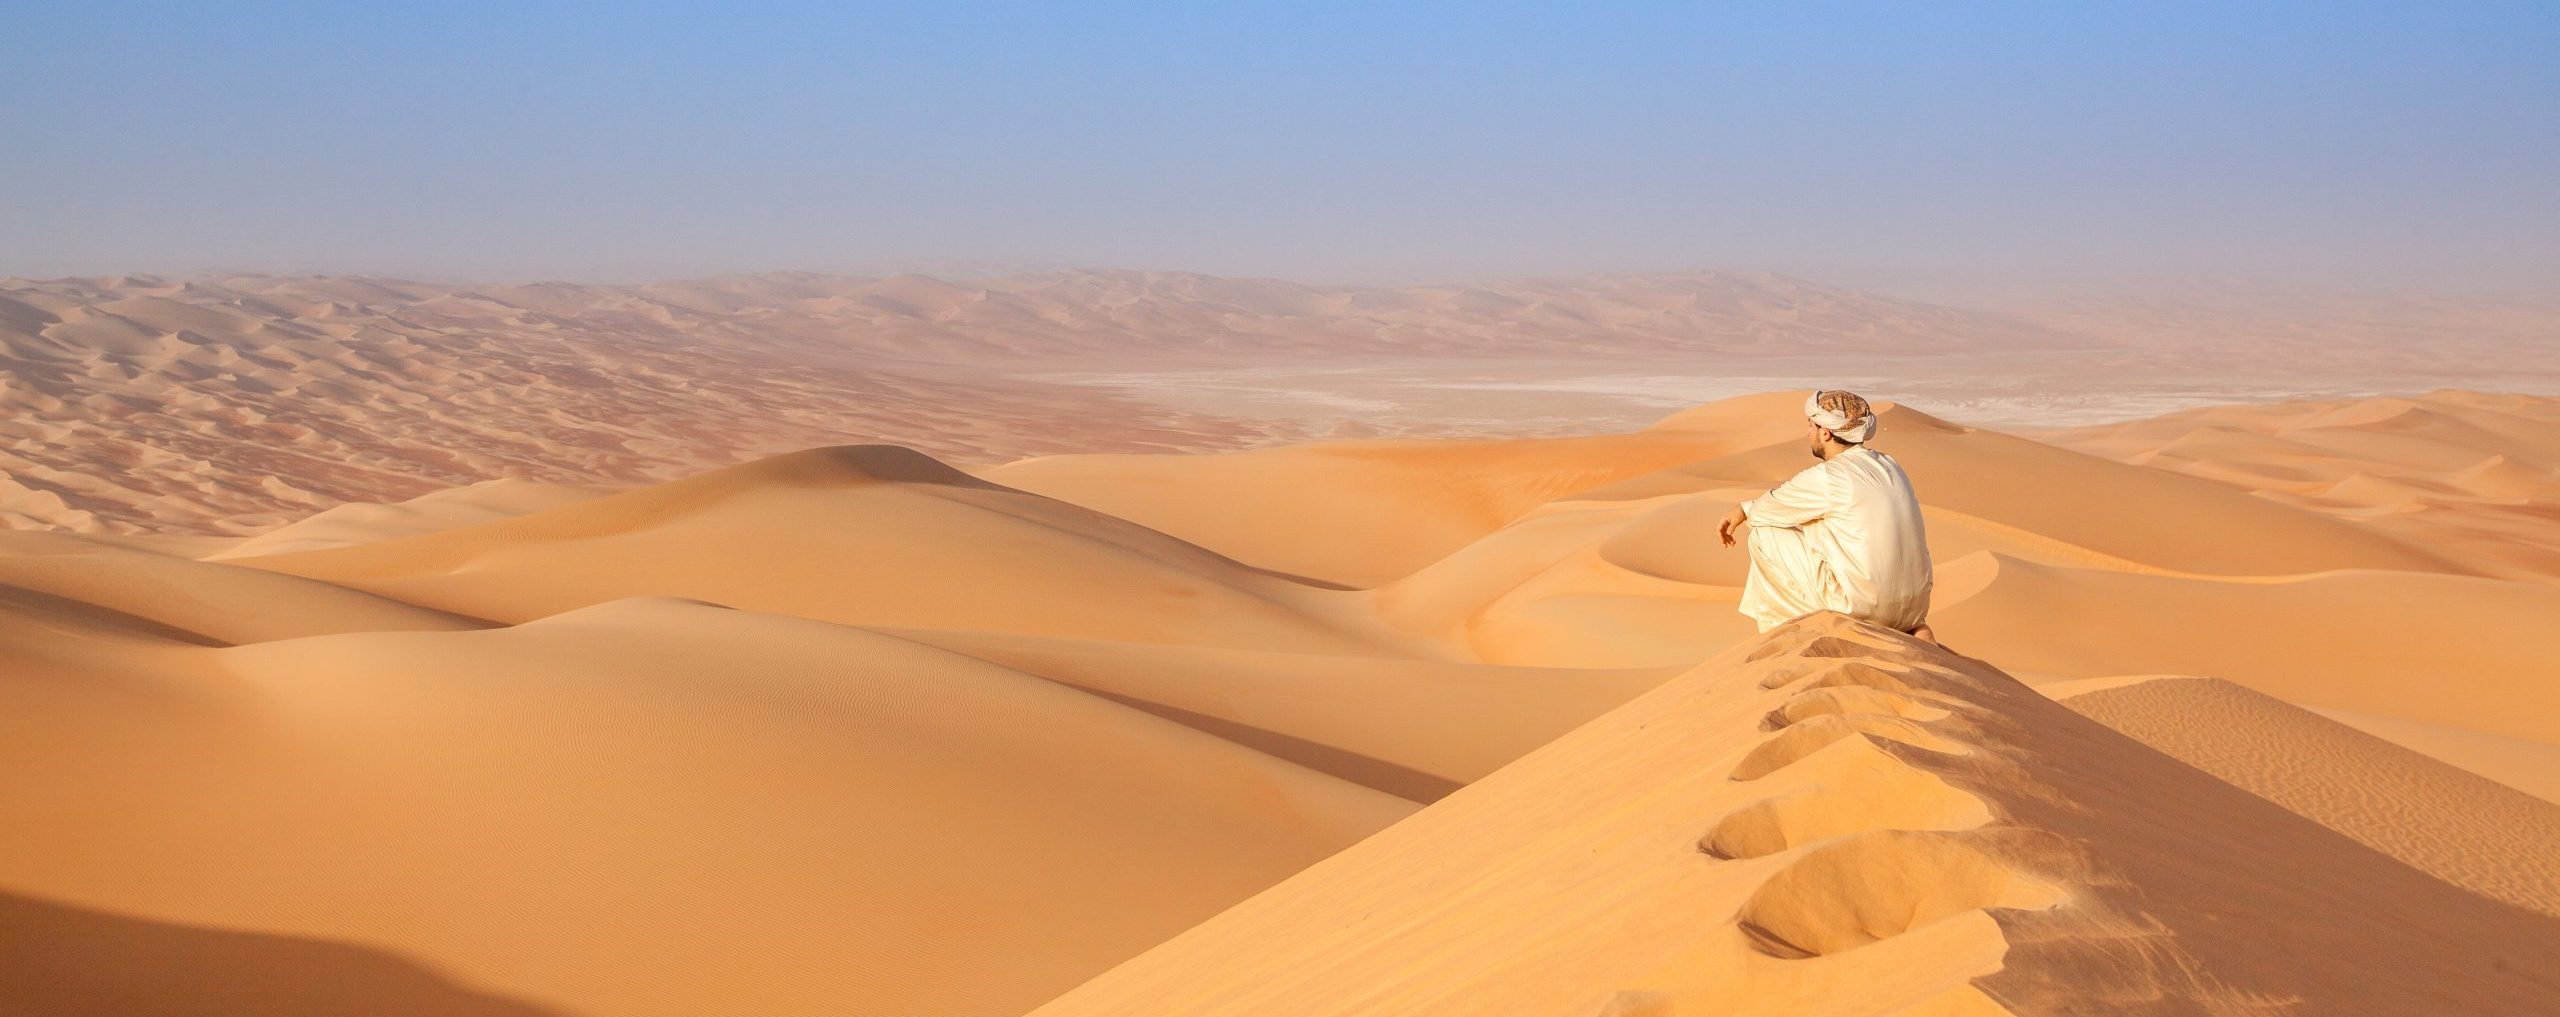 A man sitting on a sand dune looking into the distance